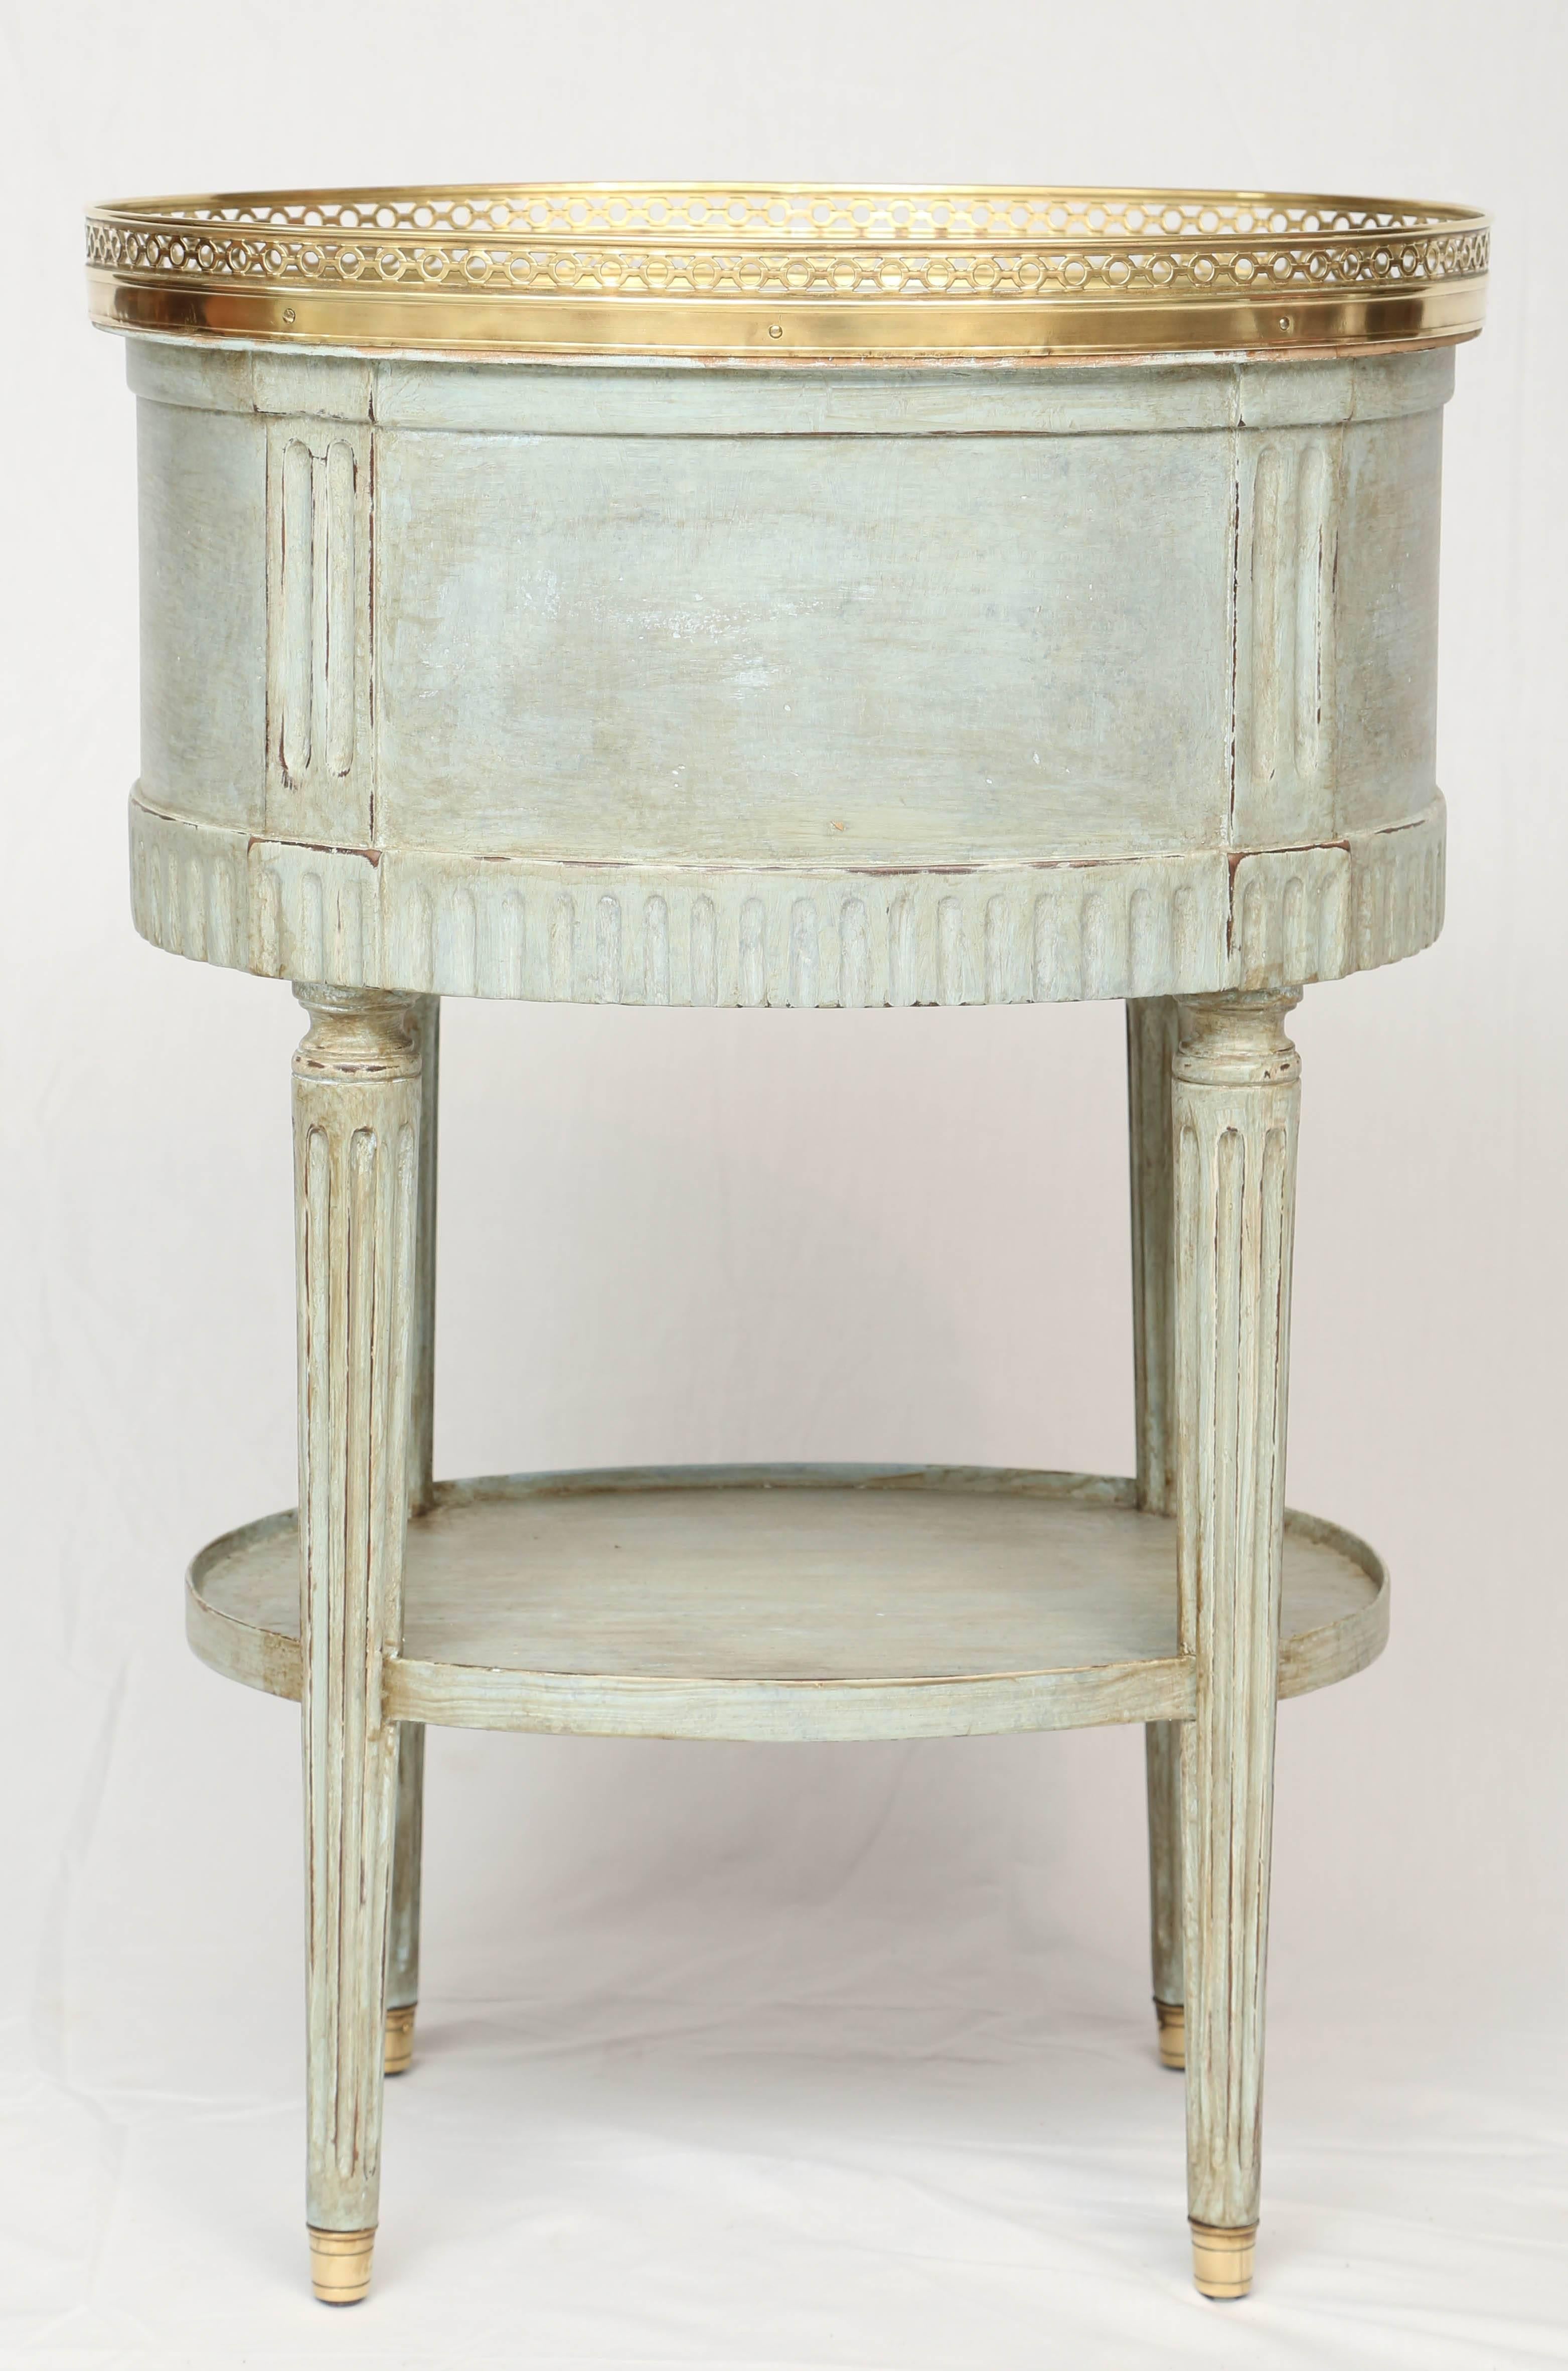 Oval French Commode with Mirrored Top In Excellent Condition For Sale In West Palm Beach, FL